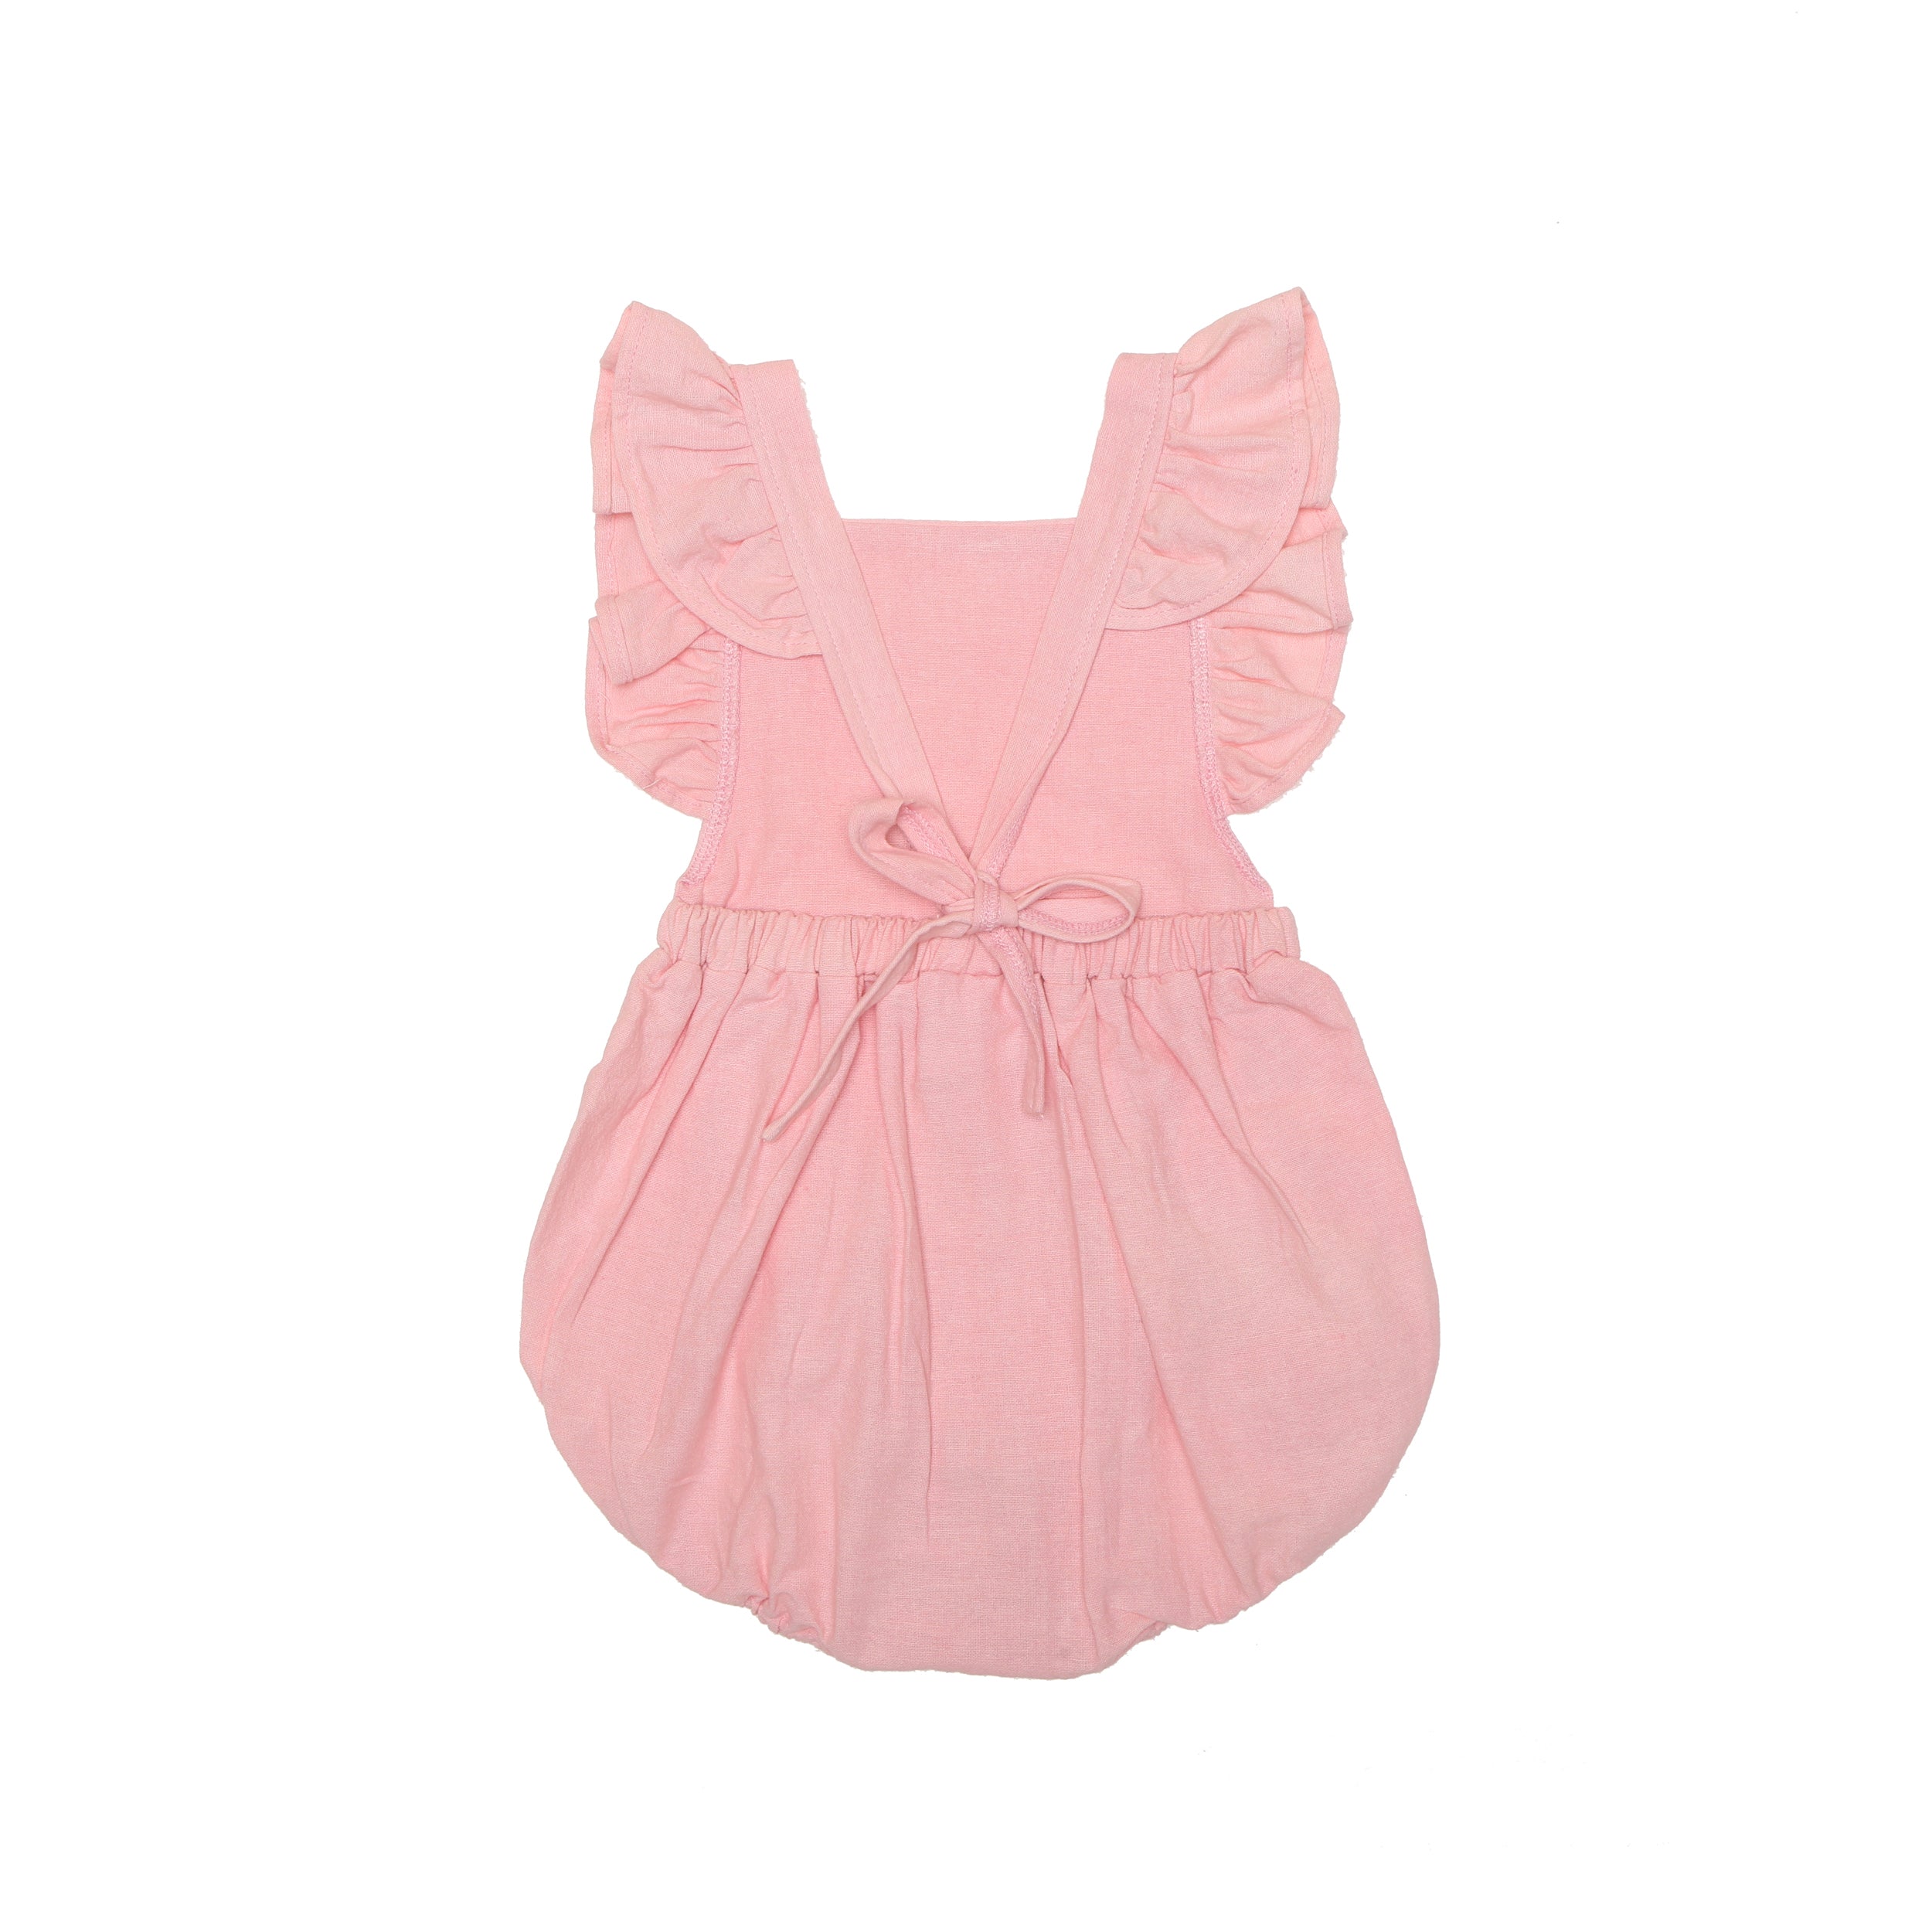 Alex & Ant - Pearl Playsuit - Rosa Pink